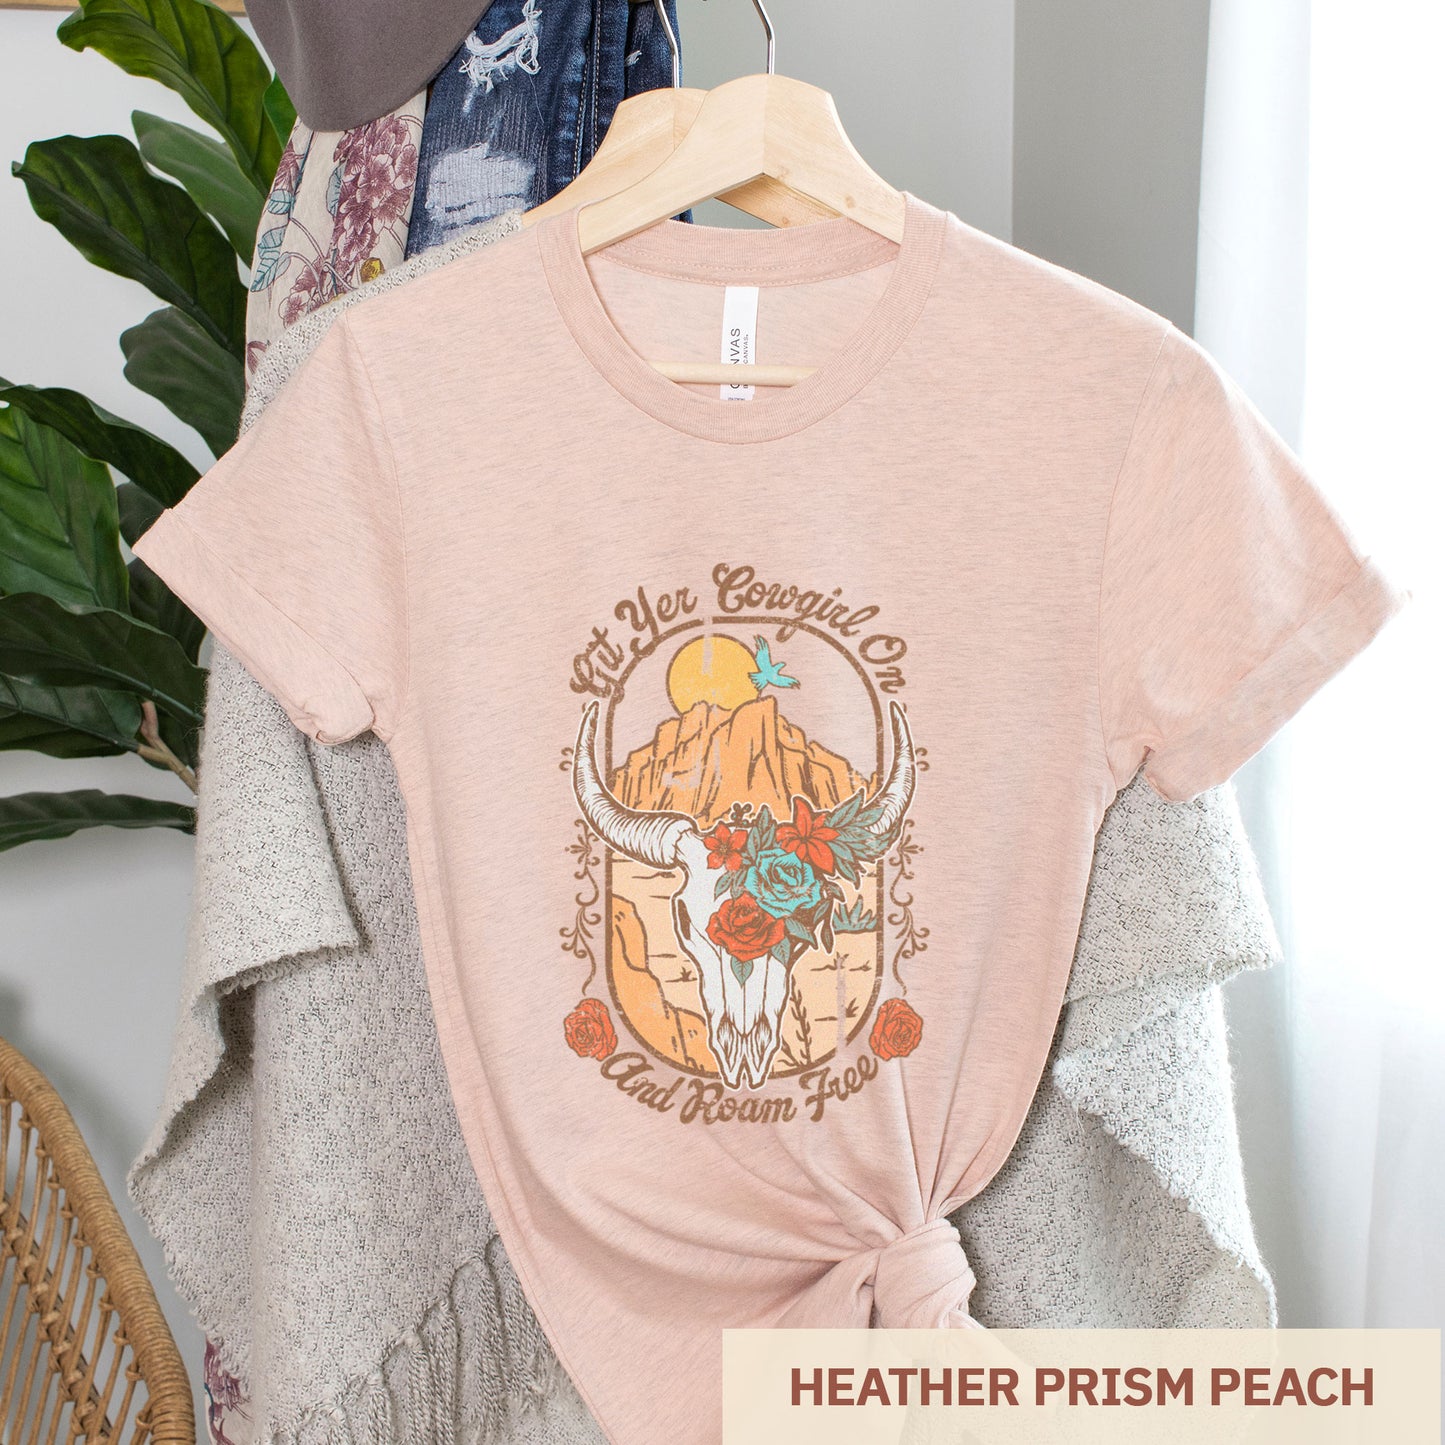 A hanging heather prism peach Bella Canvas t-shirt featuring a cow skull that says git yer cowgirl on.